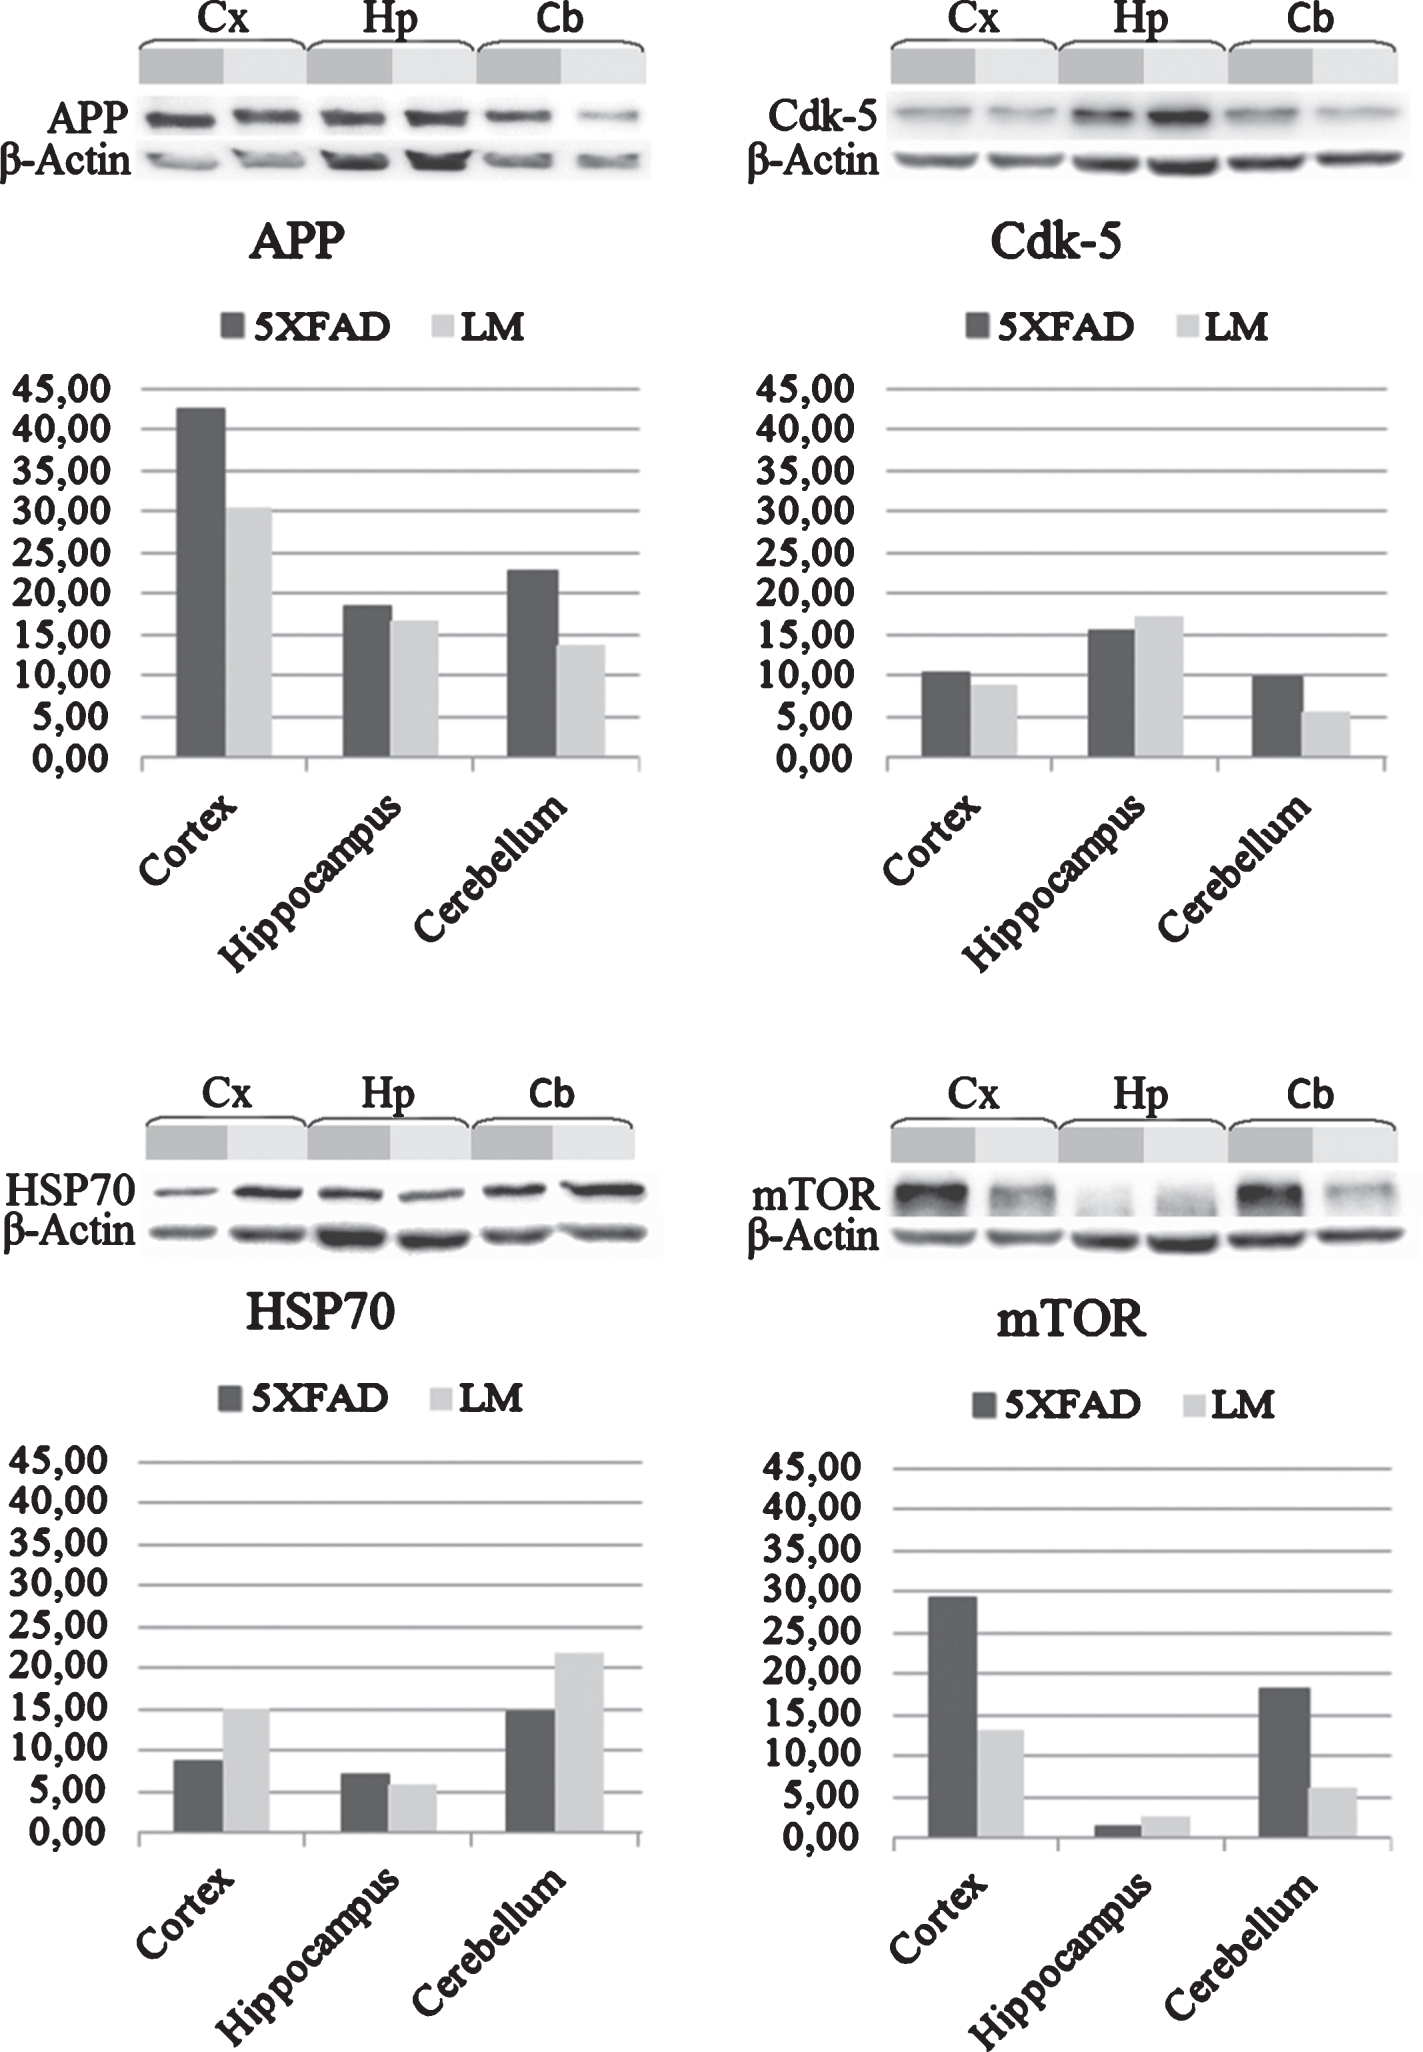 Validations with western blot. Western blot analysis of cortex, hippocampus and cerebellum shows expression change of AβPP, Cdk-5, HSP70, and mTOR proteins in newborn 5XFAD mice compared to LM.